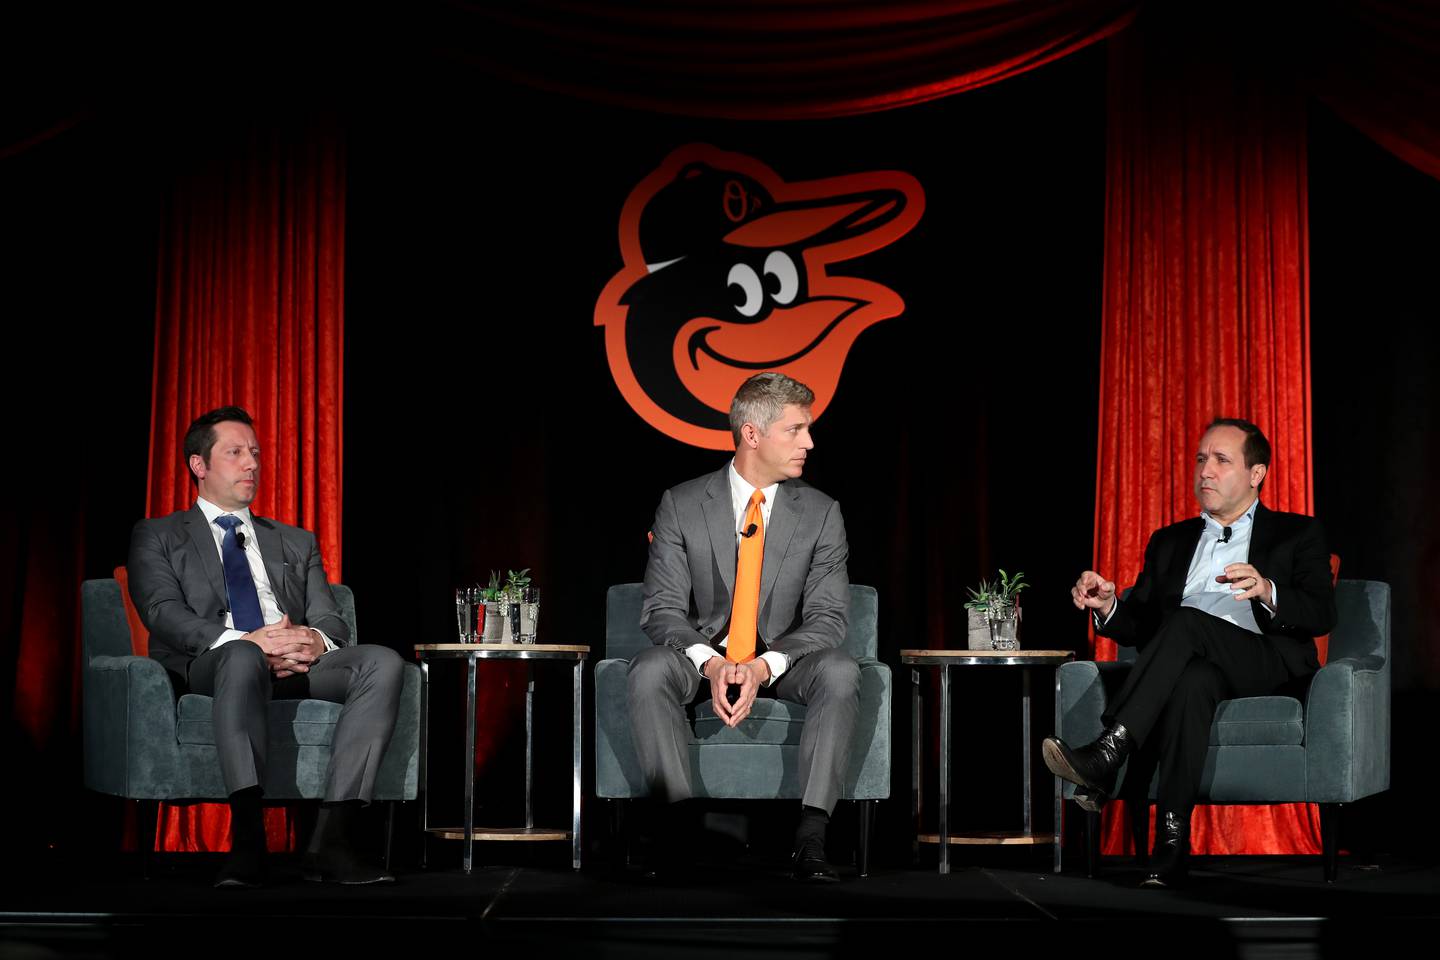 BALTIMORE, MD - NOVEMBER 19: Louis Angelos (L) and John Angelos (R) of the Baltimore Orioles look on after introducing Mike Elias (C) to the media as the Orioles Executive Vice President and General Manager during a news conference at Oriole Park at Camden Yards on November 19, 2018 in Baltimore, Maryland.